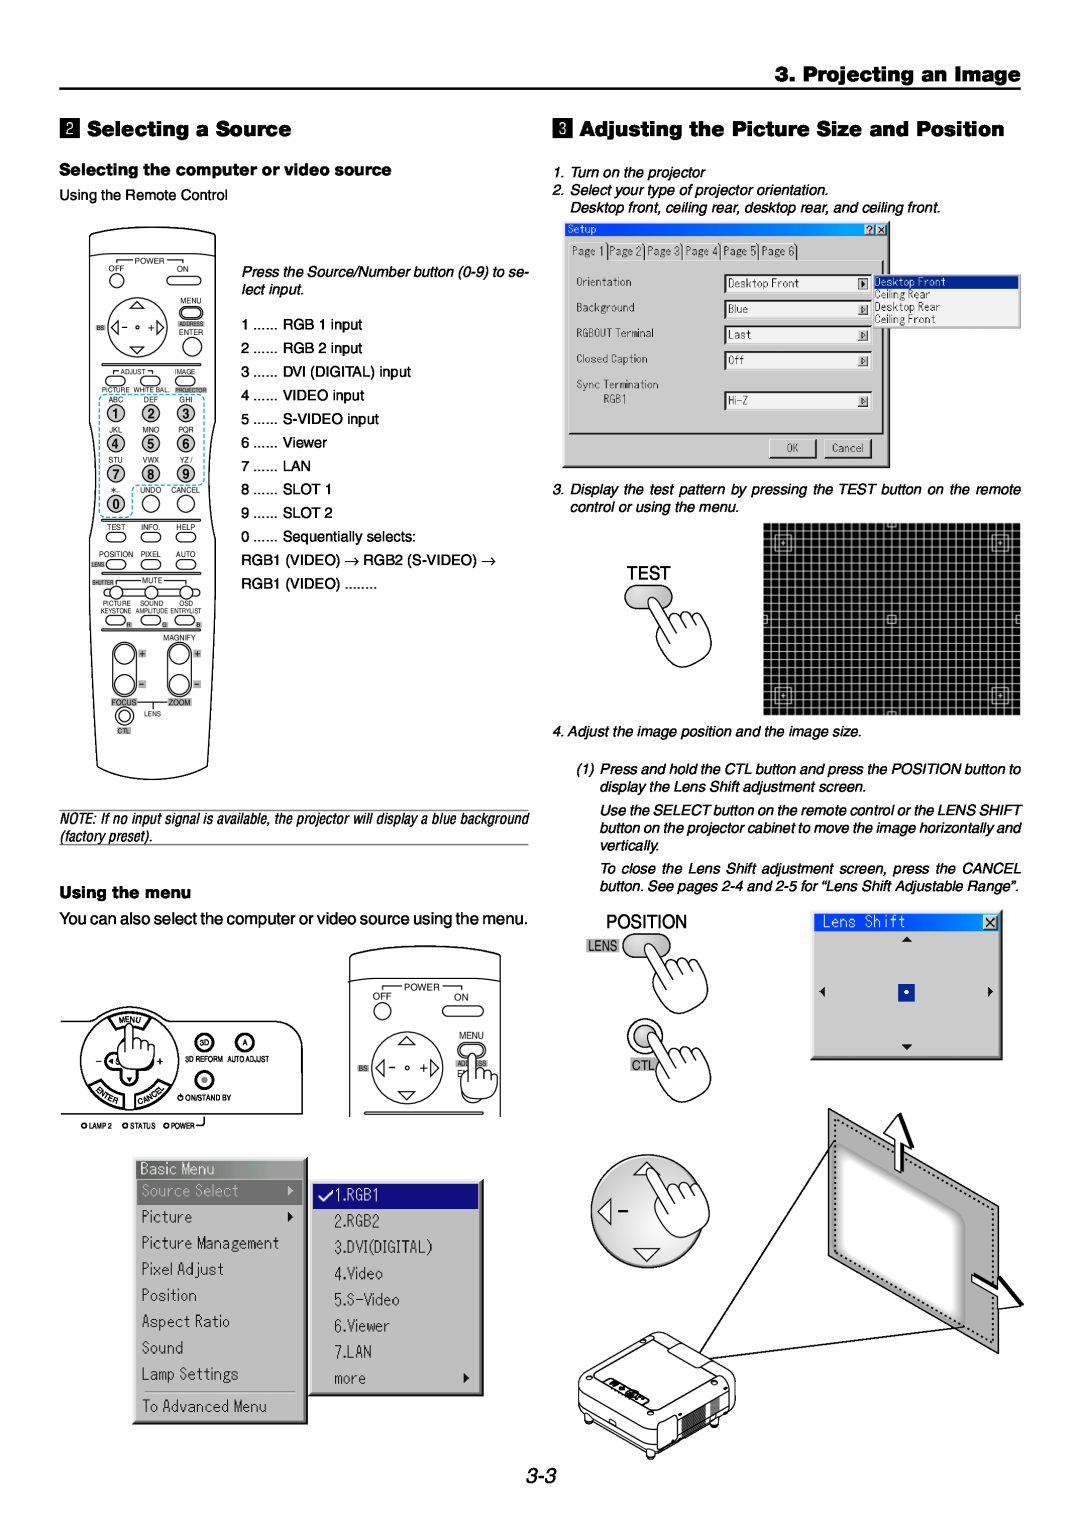 NEC GT6000 user manual Projecting an Image, x Selecting a Source, c Adjusting the Picture Size and Position, Using the menu 